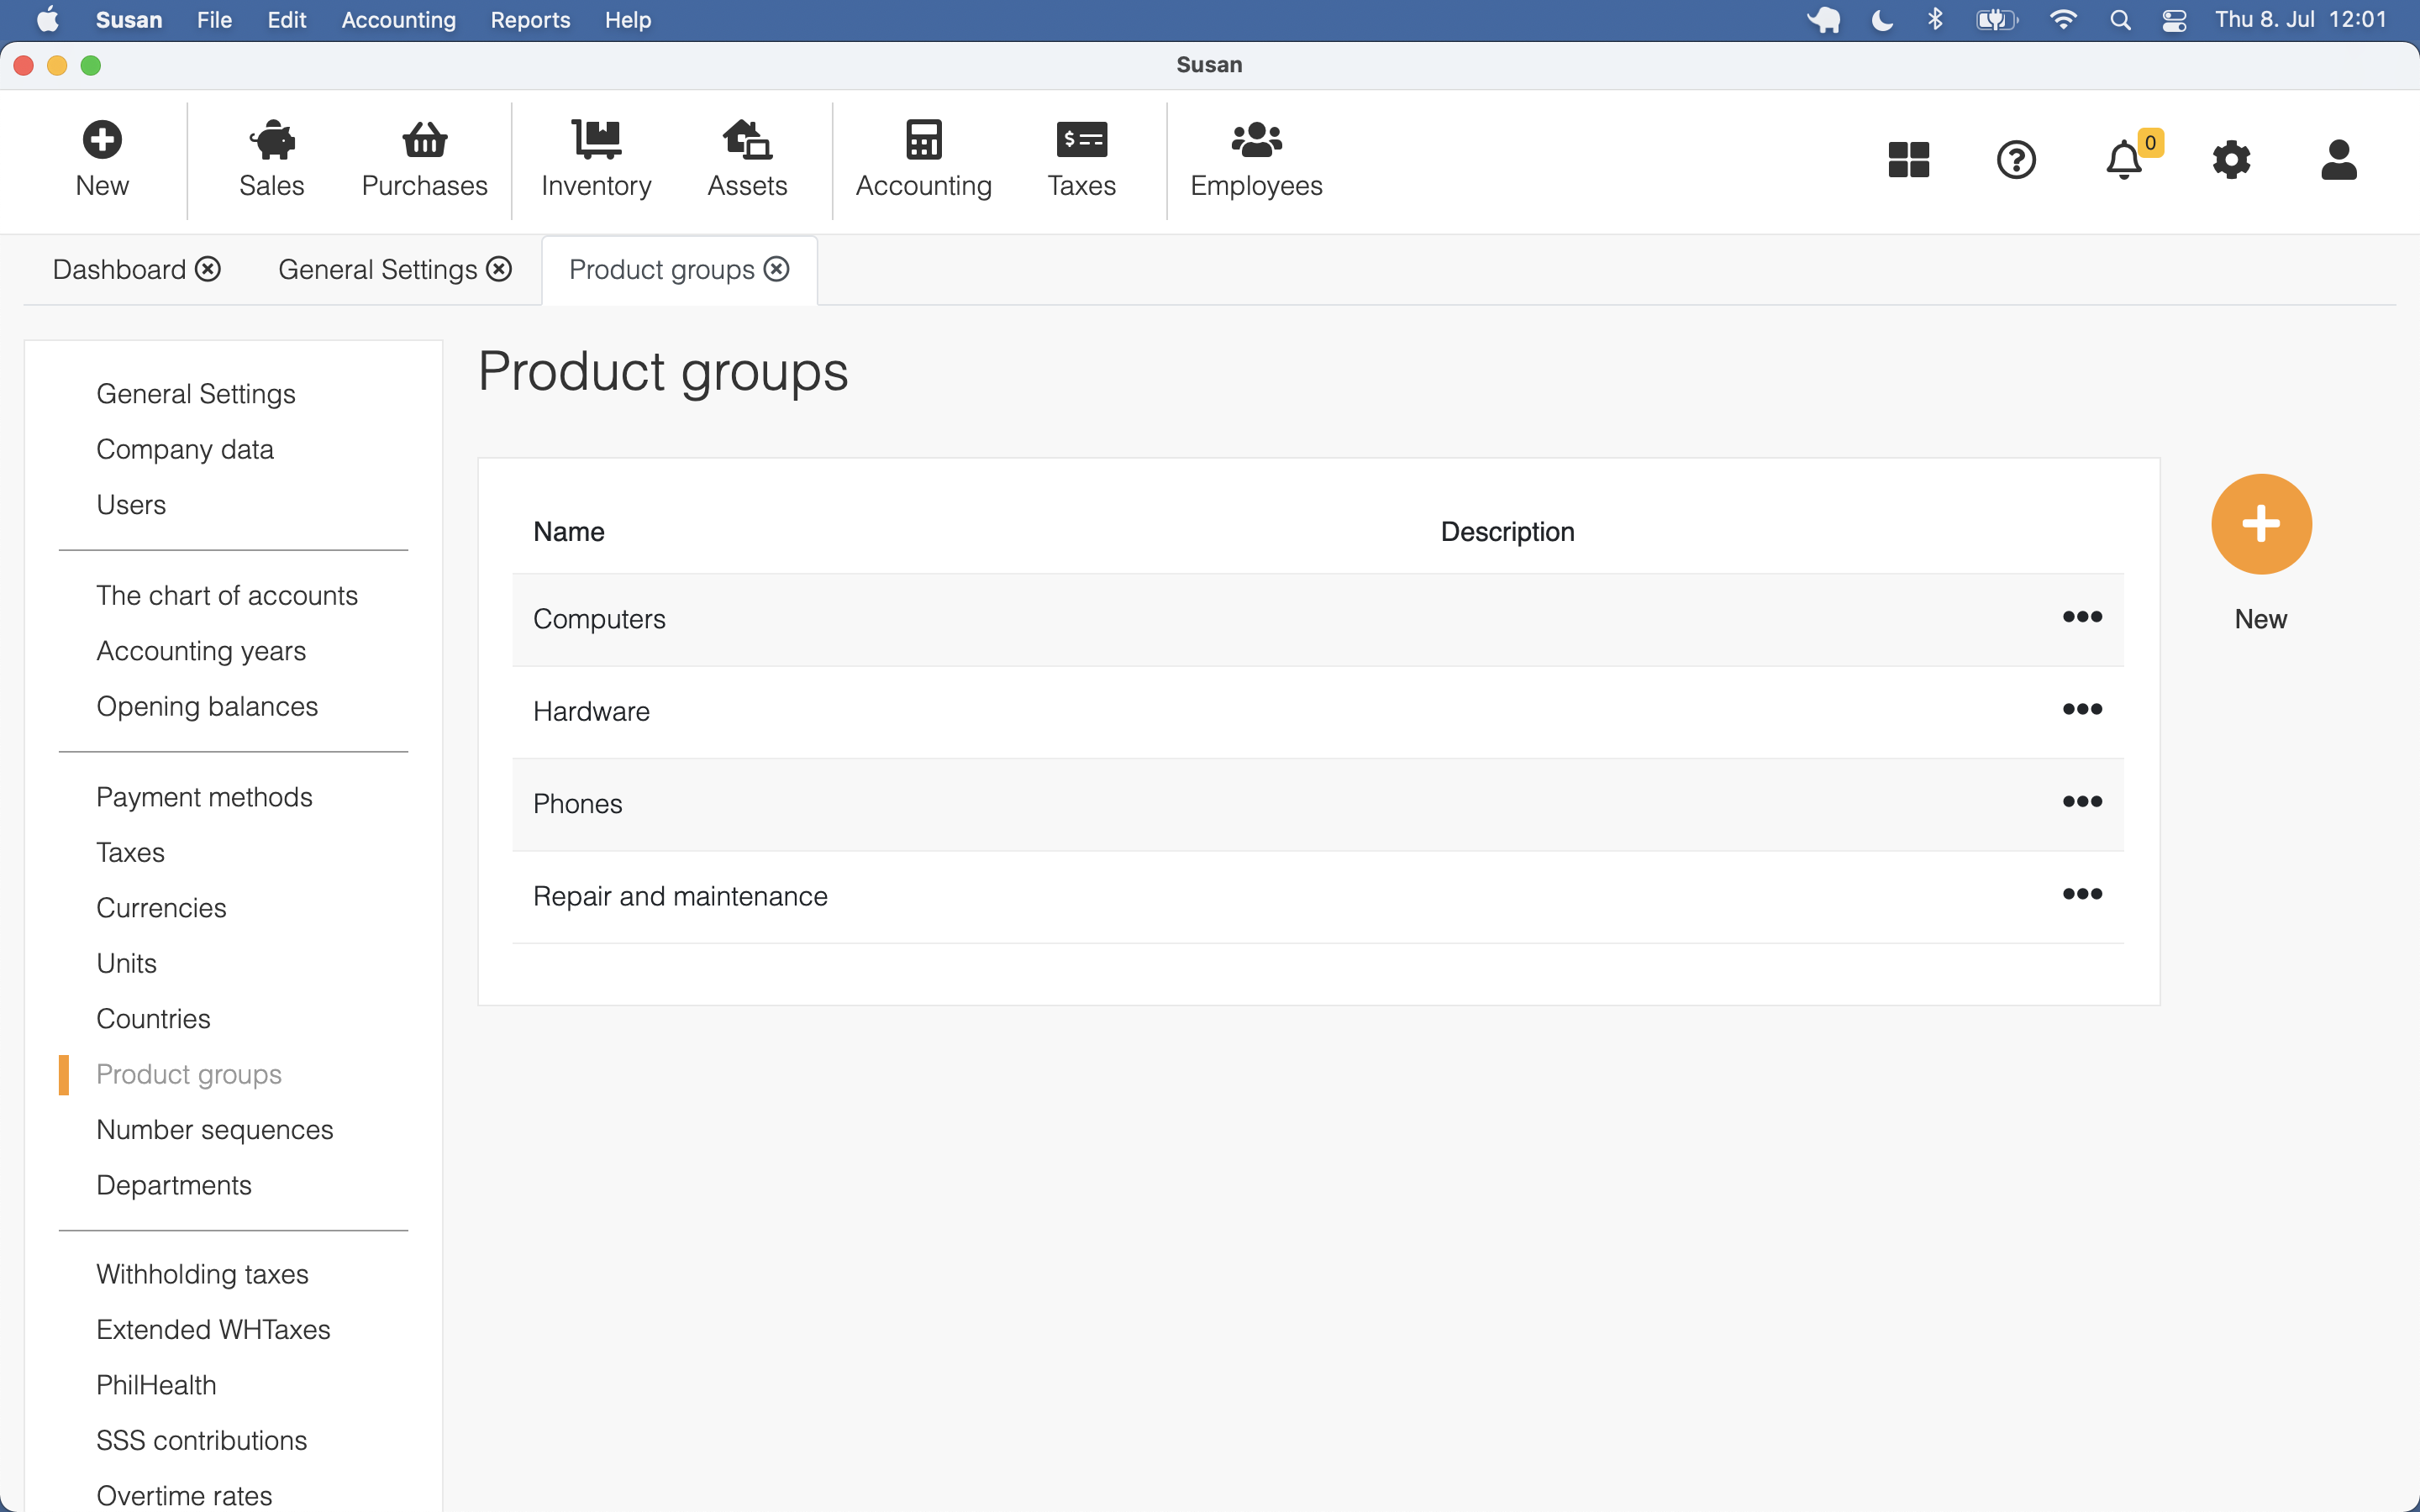 Product Groups